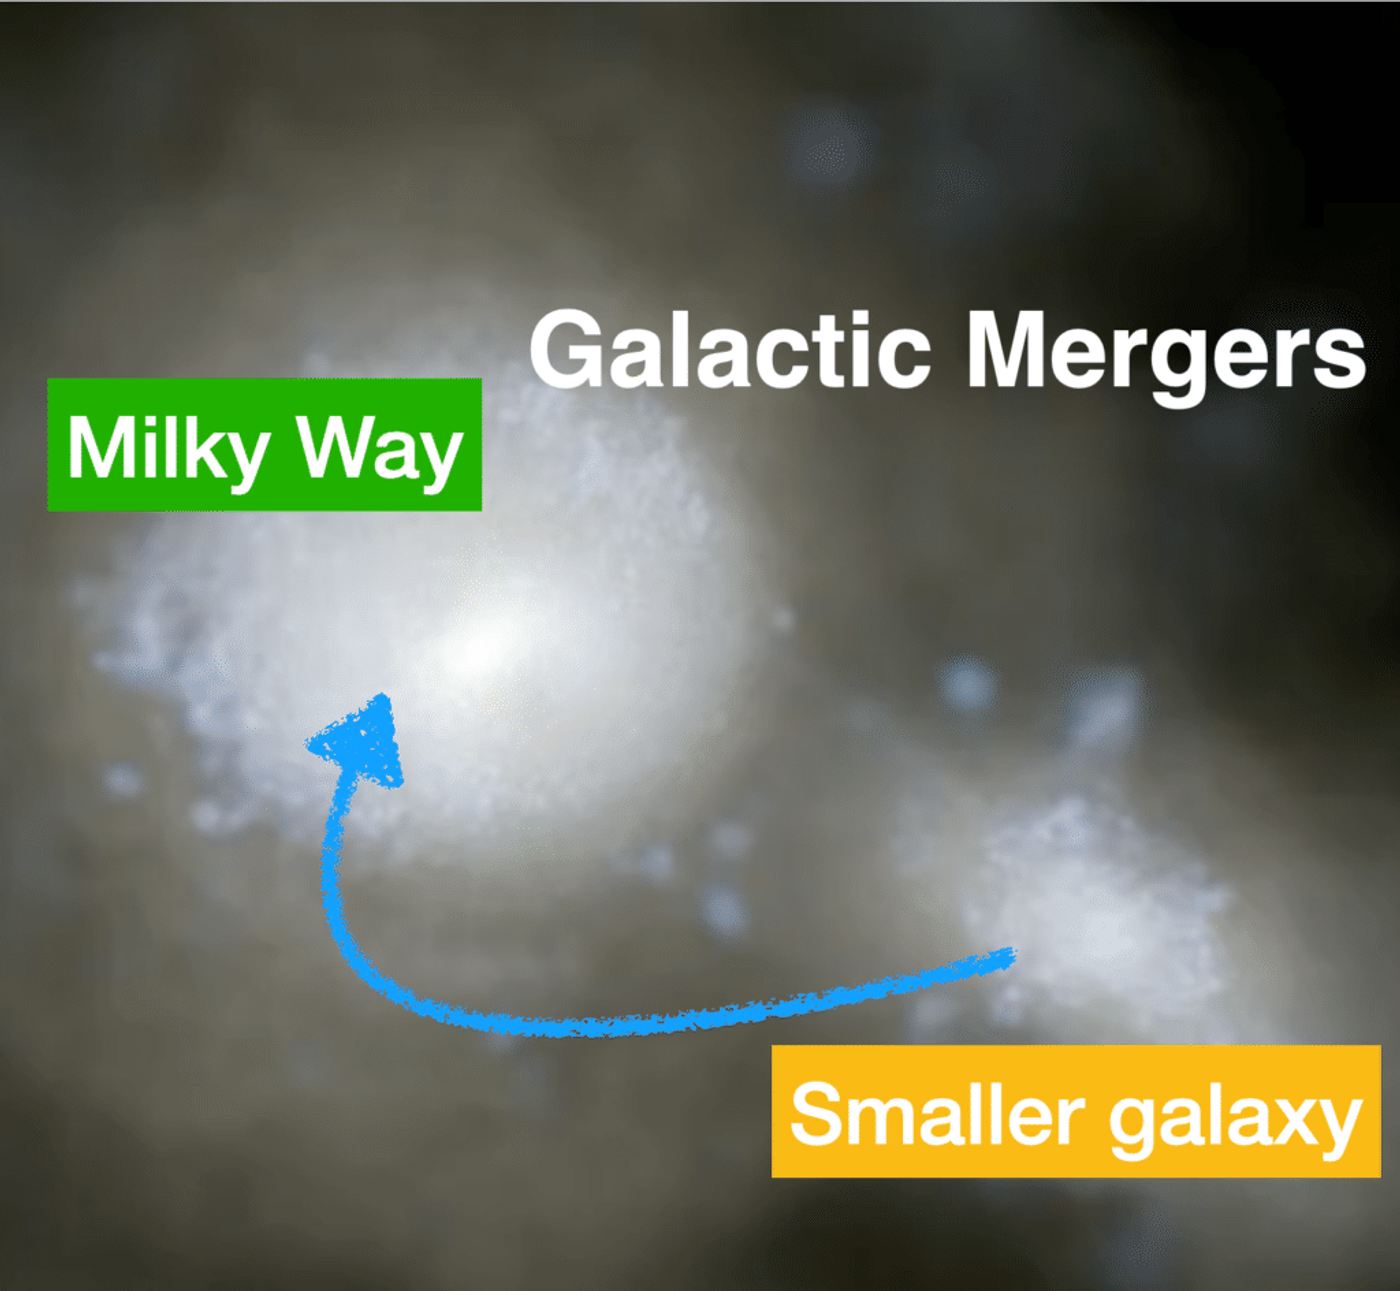 A simulation of a collision between the young Milky Way and a smaller galaxy. Credit: Dr Tobias Buck (AIP/MPIA/NYU)